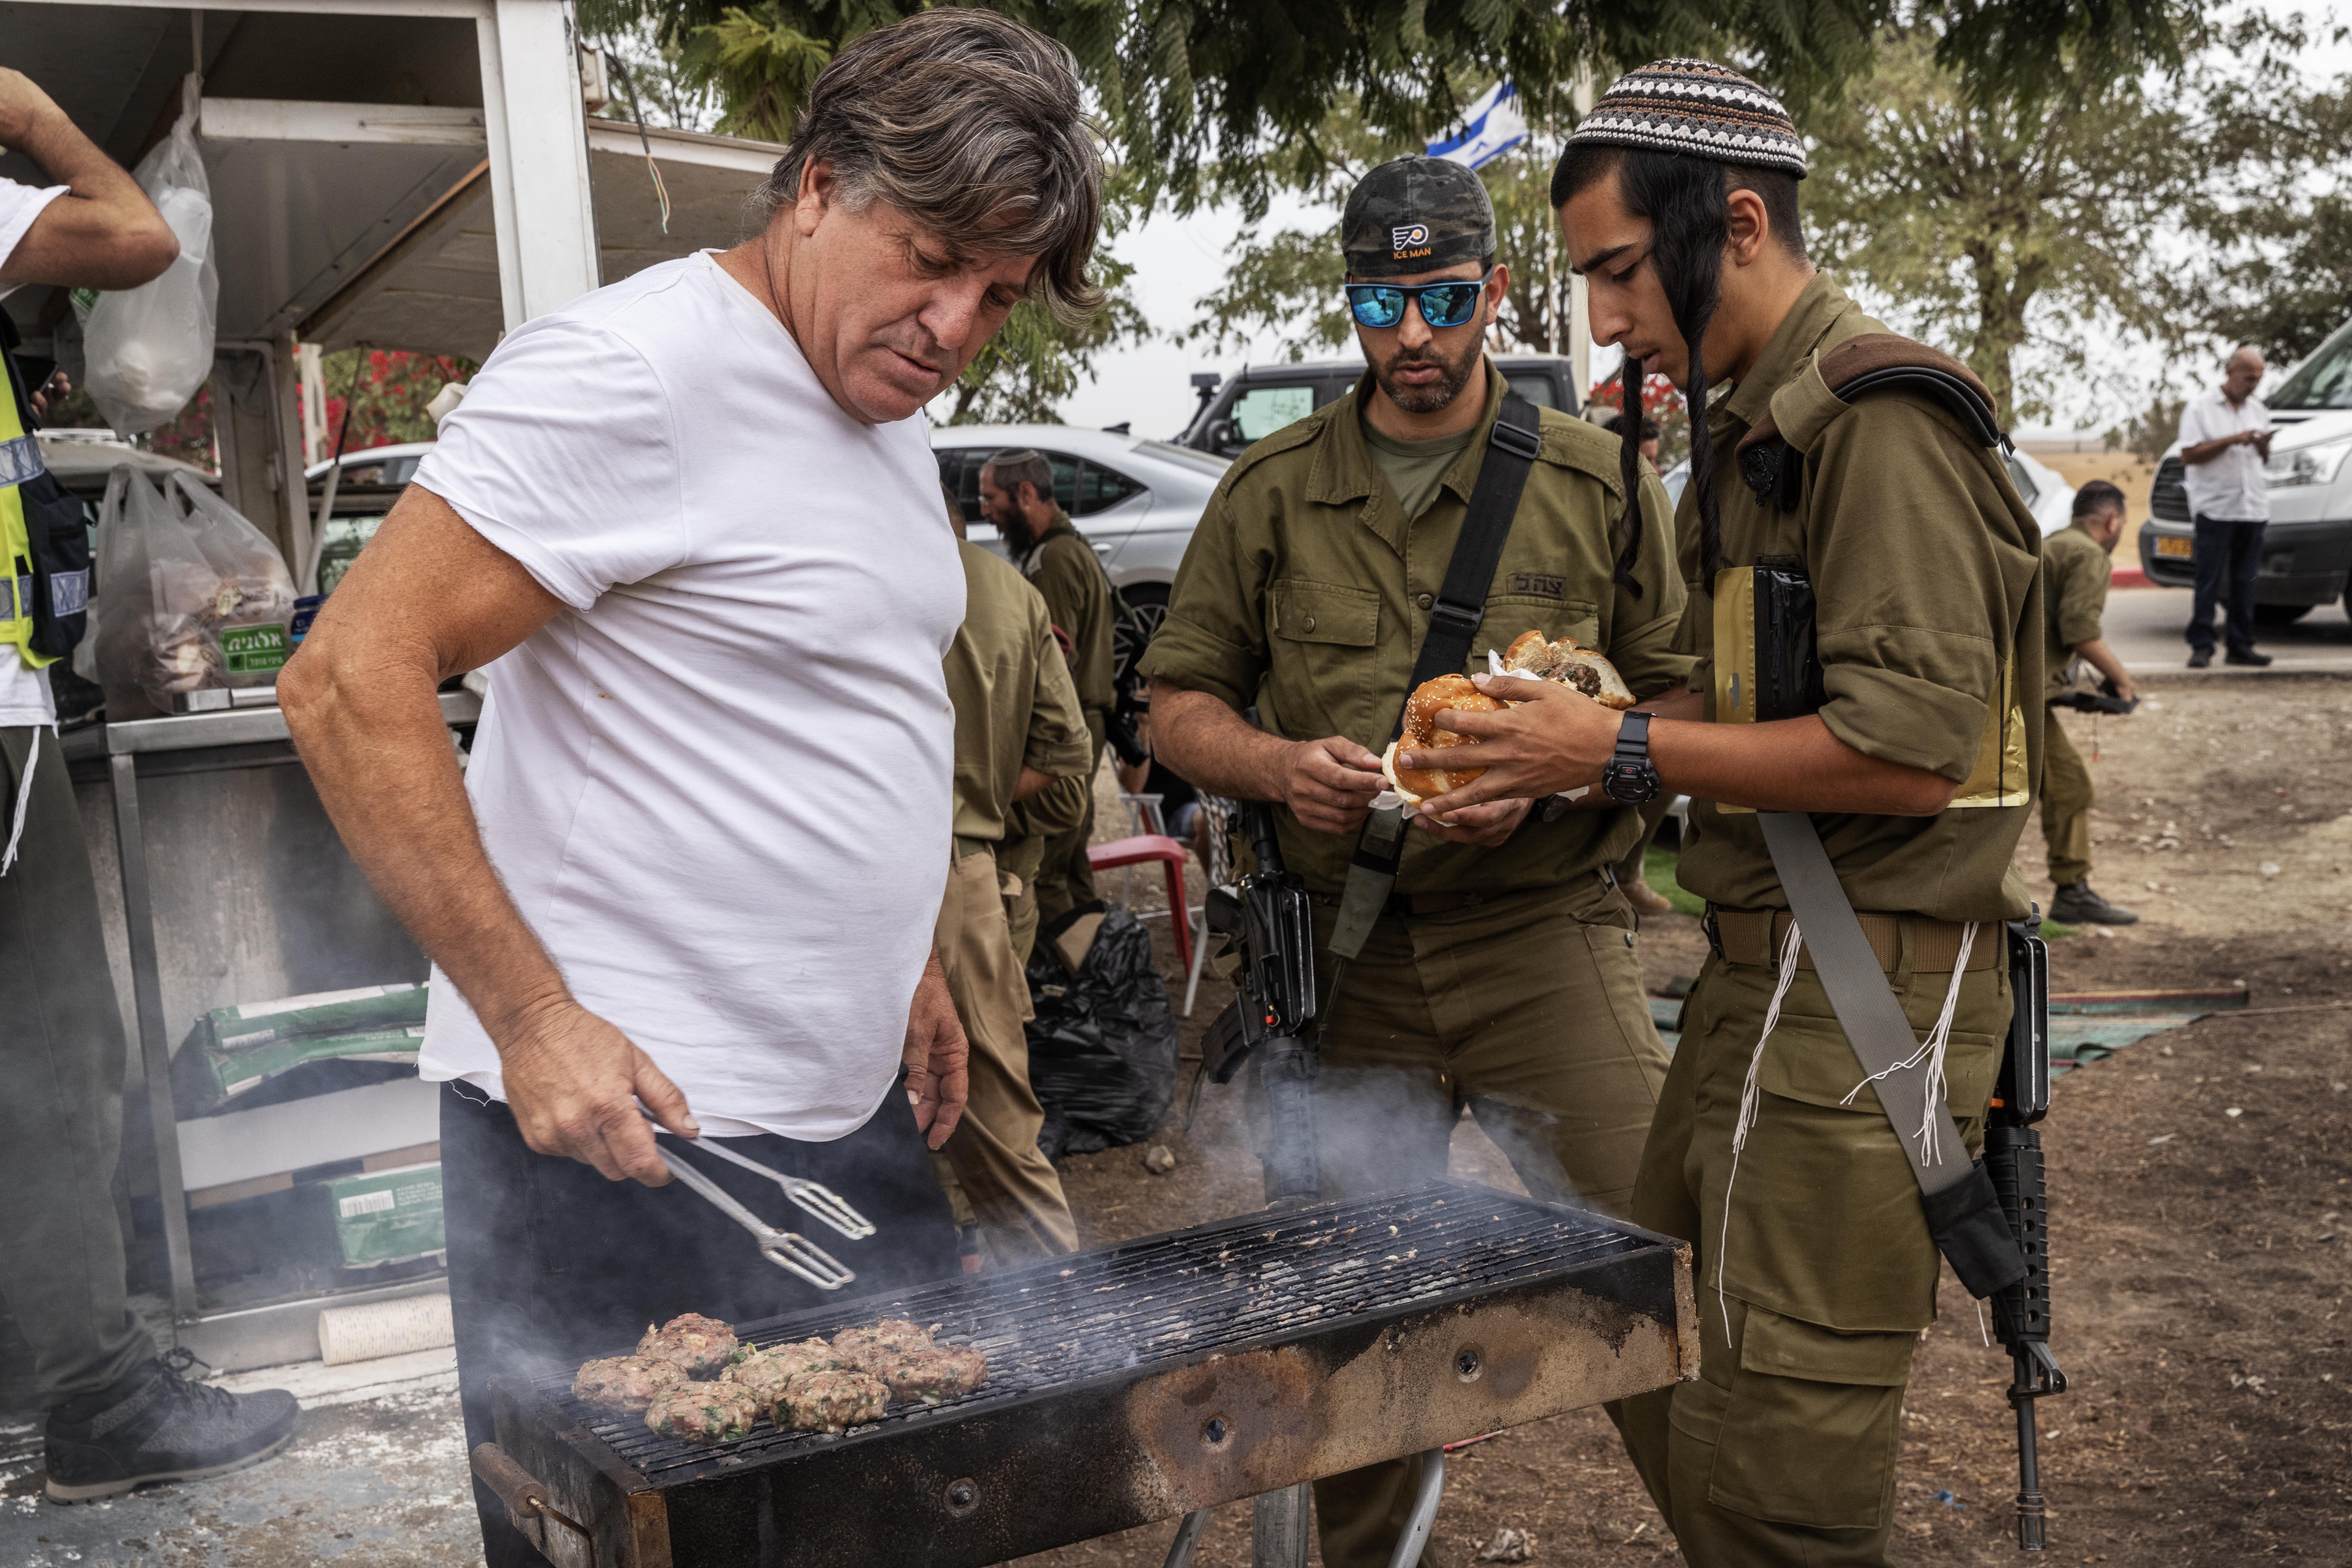 Burgers, coffee and haircuts lined up for returning Israeli soldiers